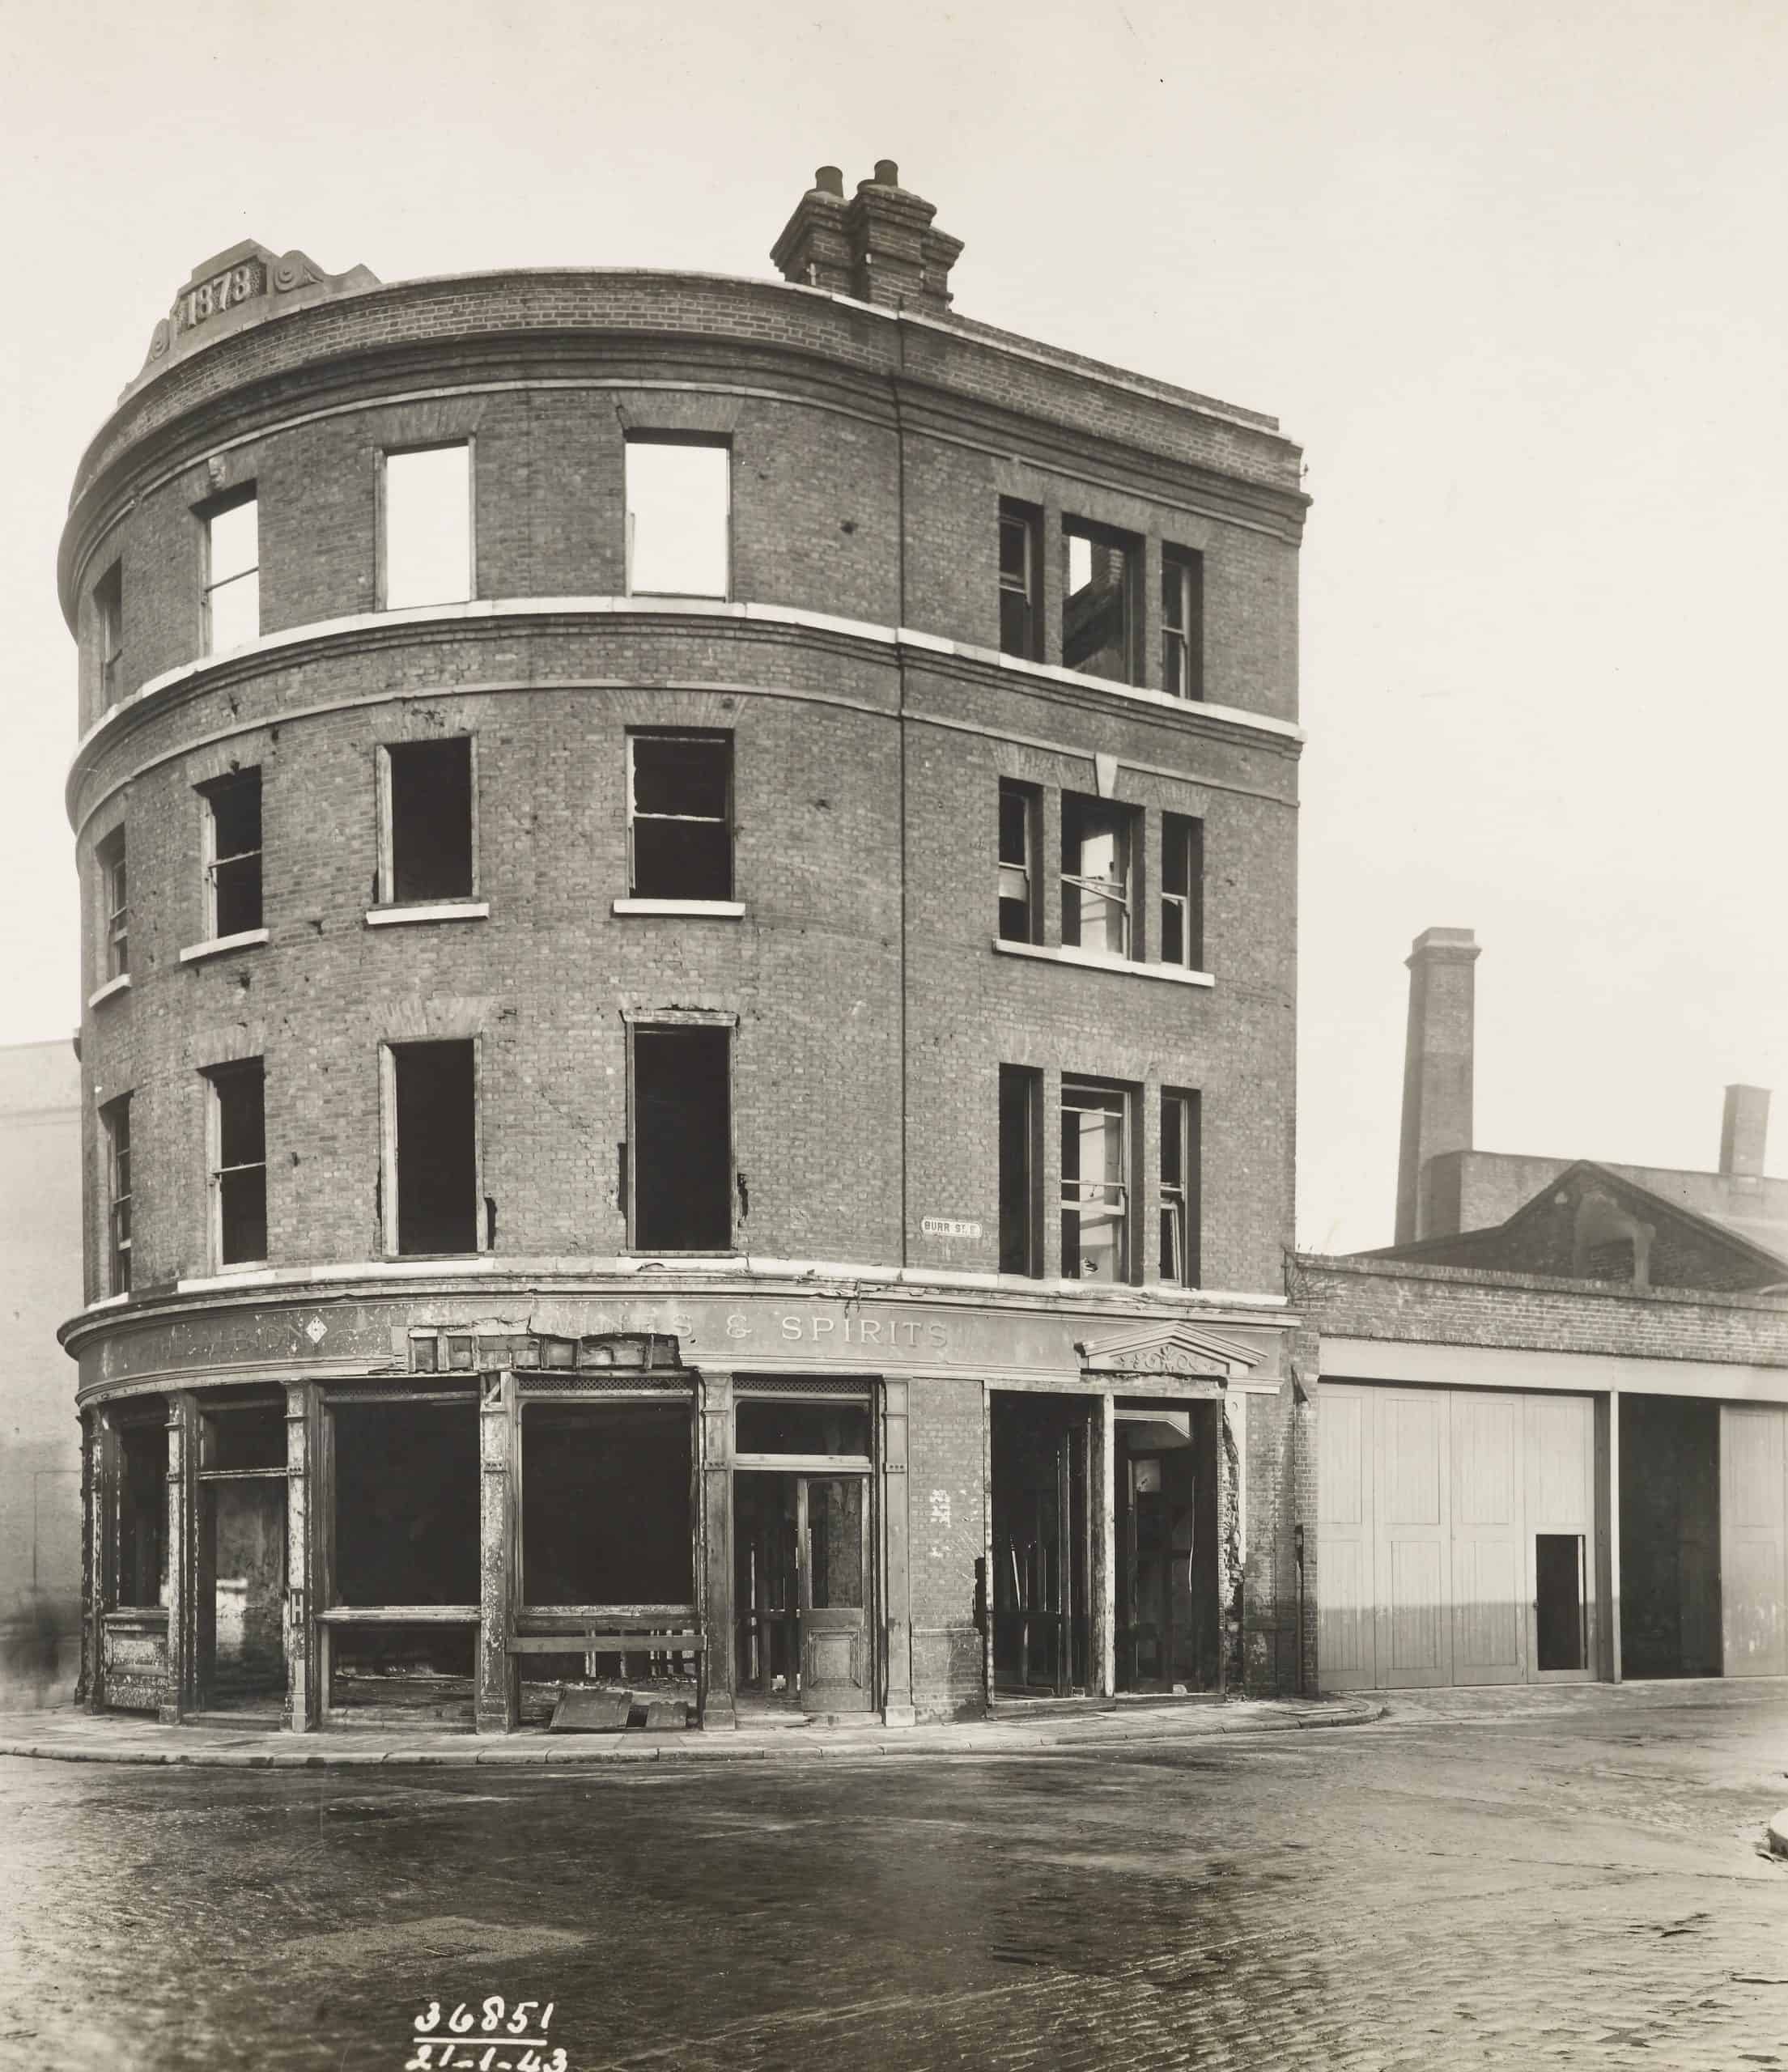 Bomb damage to Albion Public House (built 1878). Corner of  Burr Street and St Katharine Way.
WWII, Blitz, air raid damage.
Date of air raid 10-11/05/1941
Date: 21/01/43